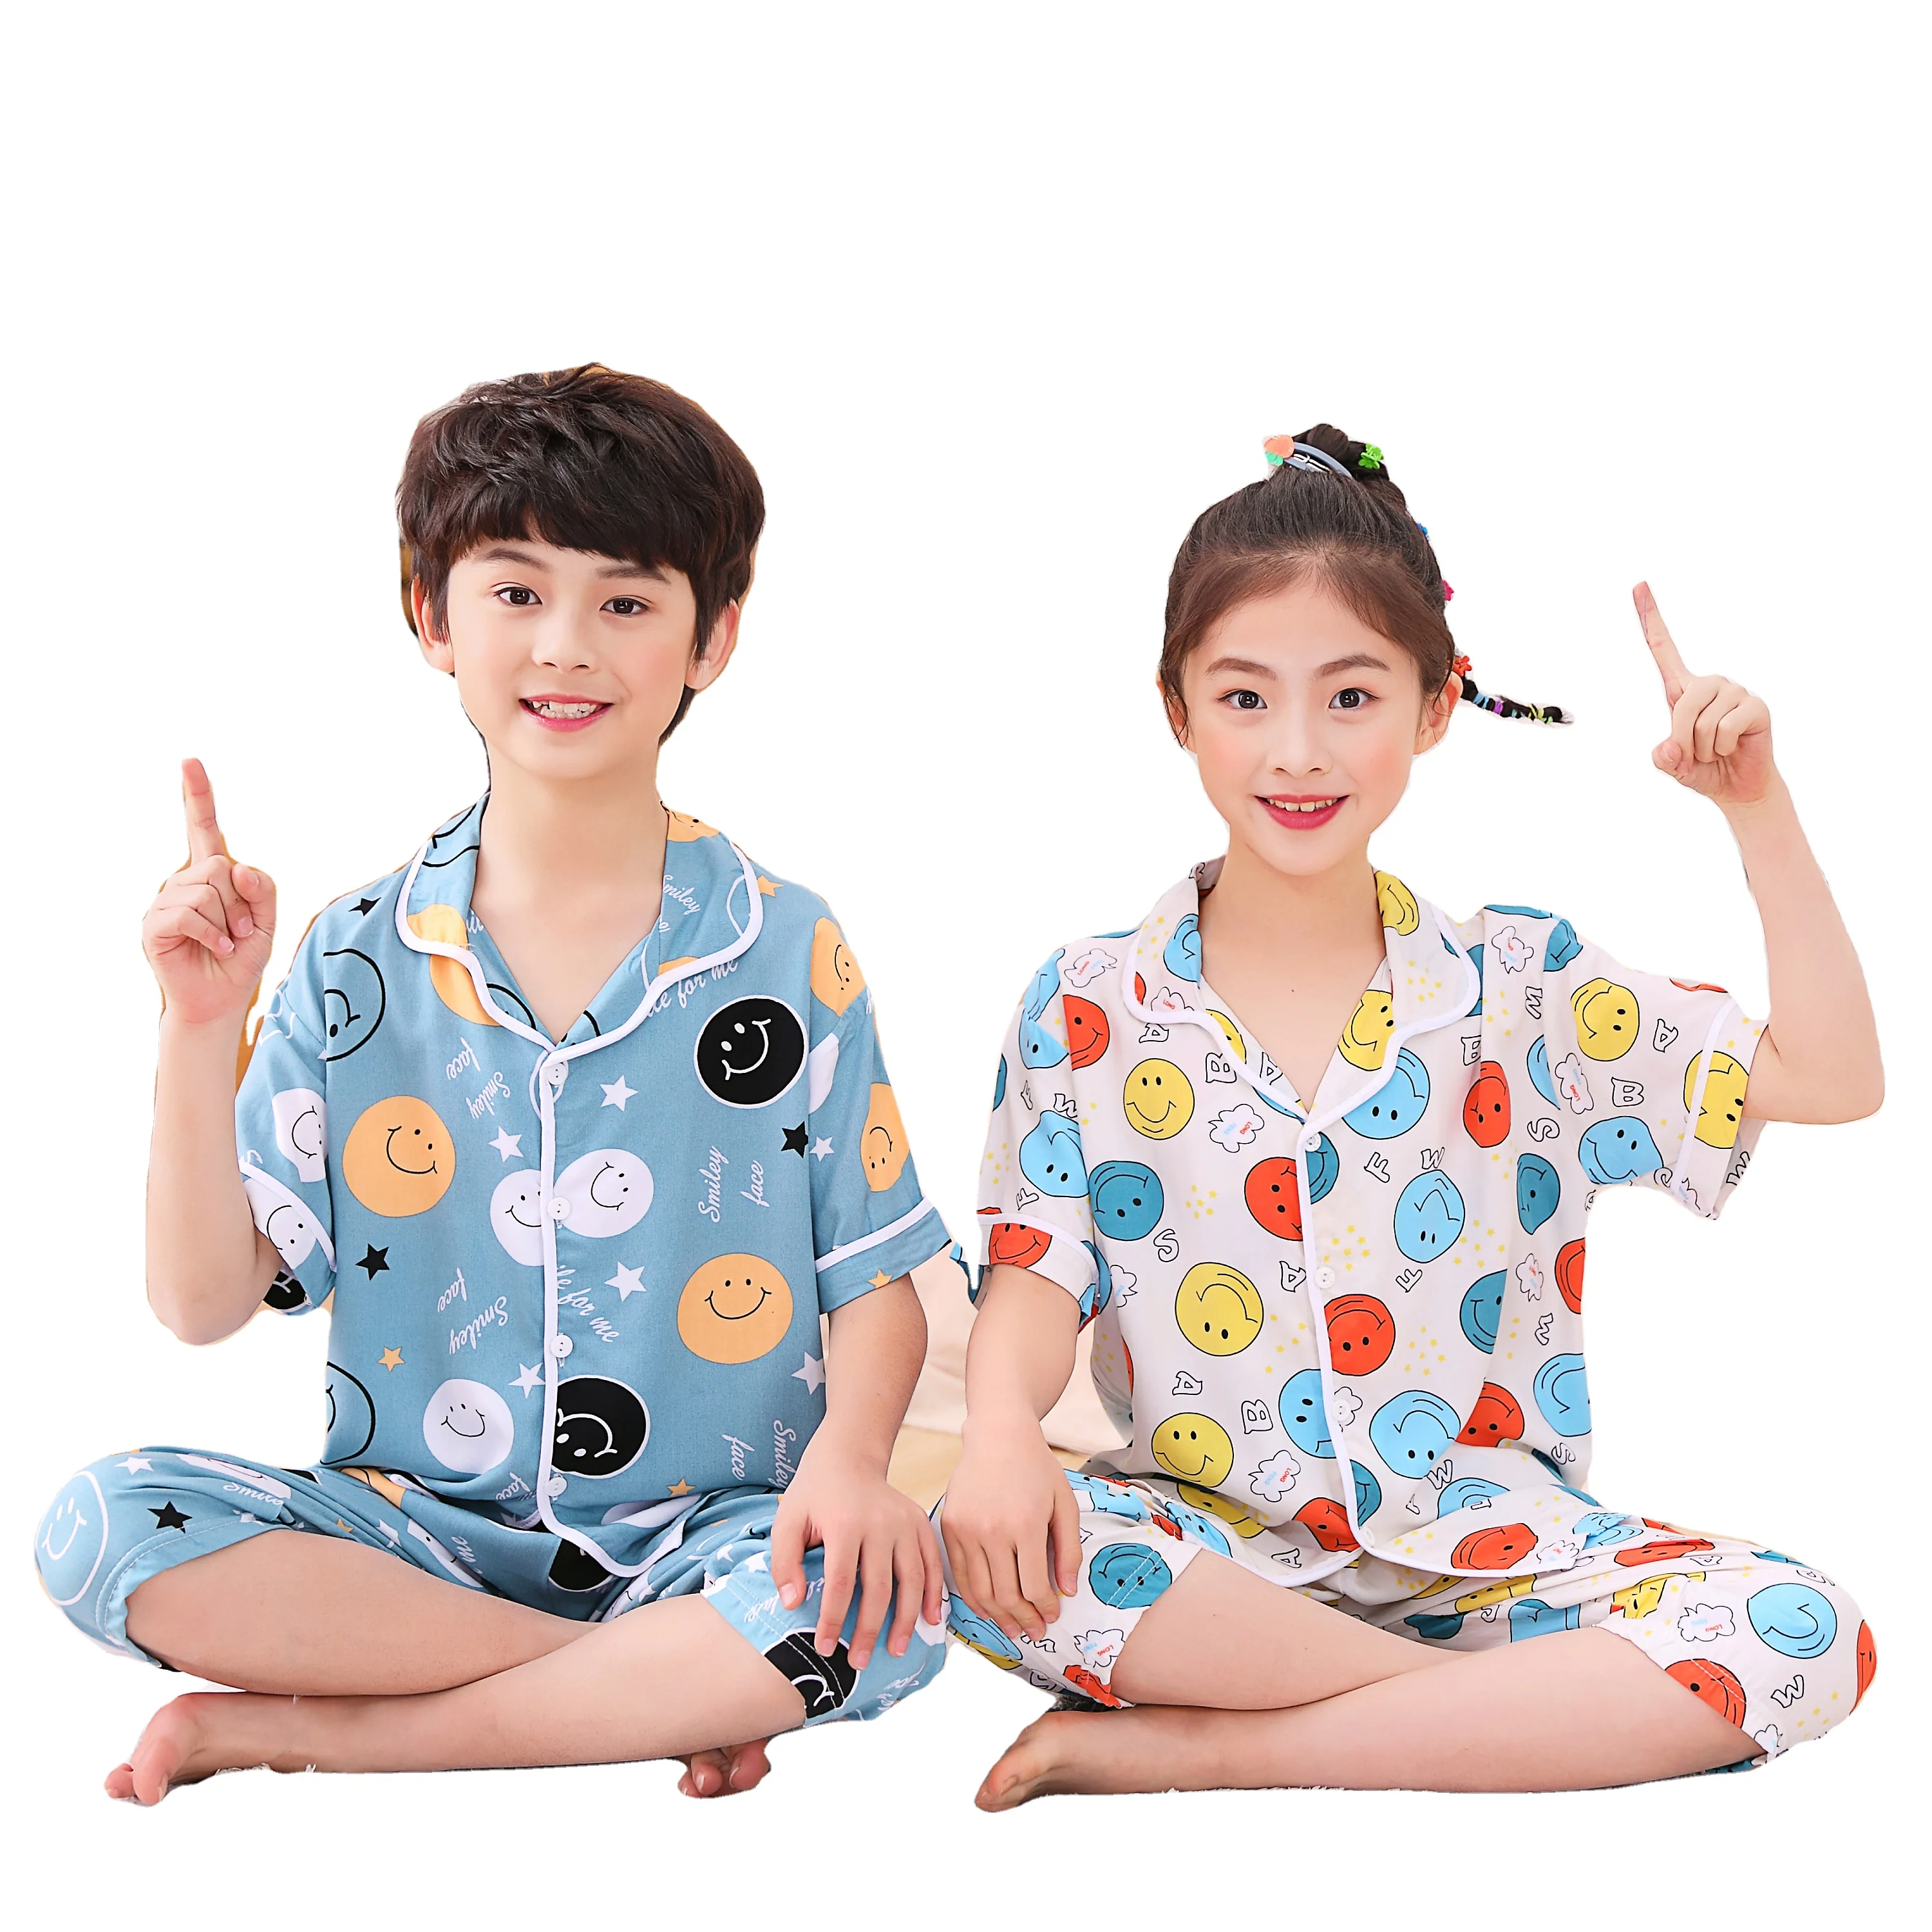 

2021 Kids clothing children's two-piece girl's autumn pajamas suit for boys and girls casual home wear kids clothing sets, A variety of colors are available